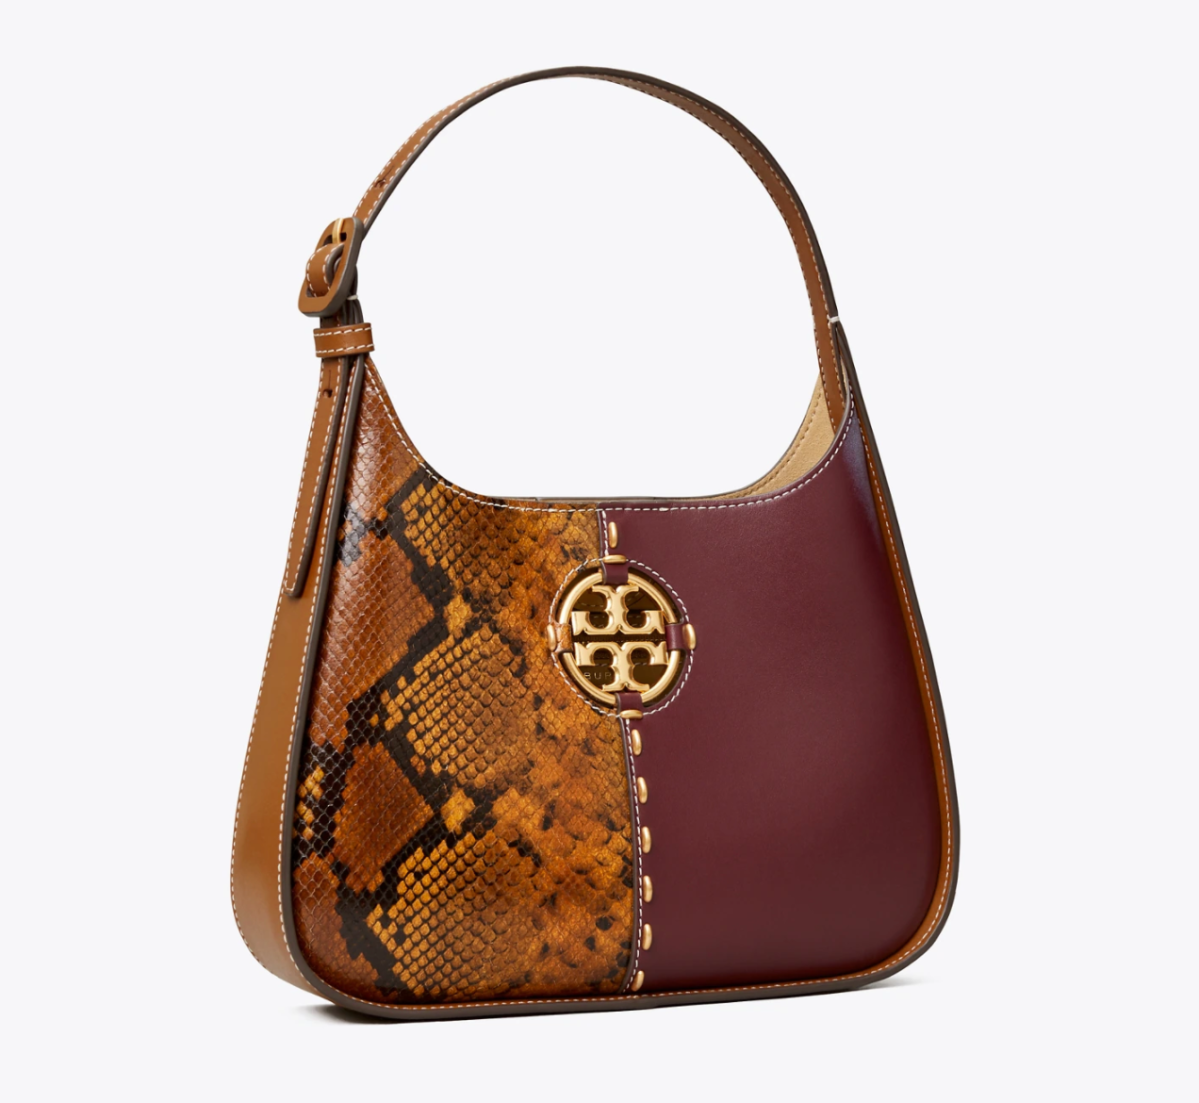 Tory Burch Miller Small Classic Shoulder Bag in Brown